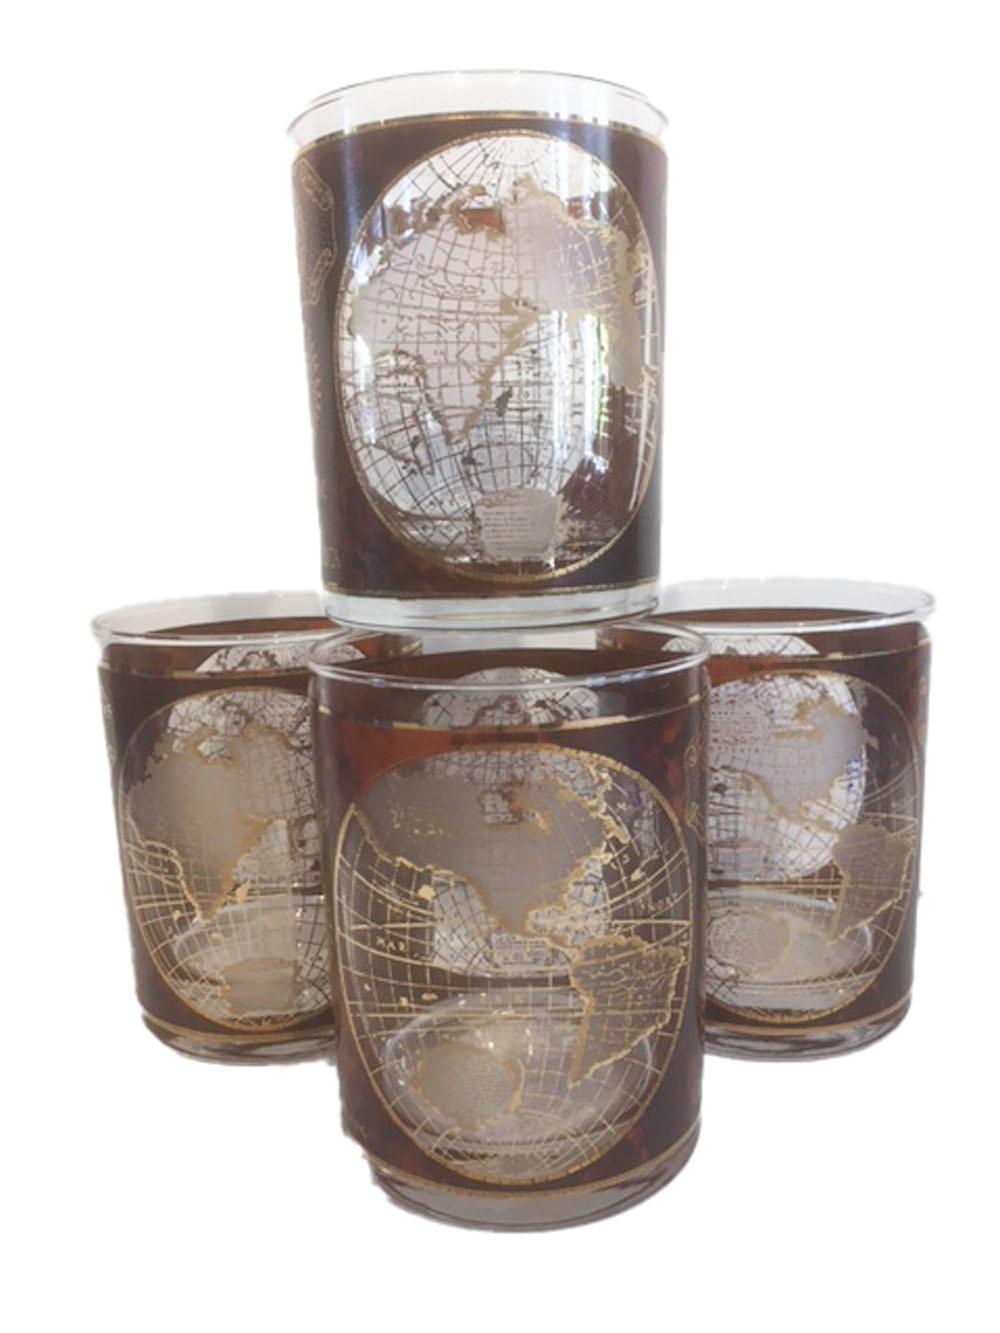 Vintage set of 4 Culver, LTD. large rocks glasses with open fields on a simulated leather background, the open fields decorated with old world maps of the eastern and western hemispheres. The sides decorated with map and sun images along with the